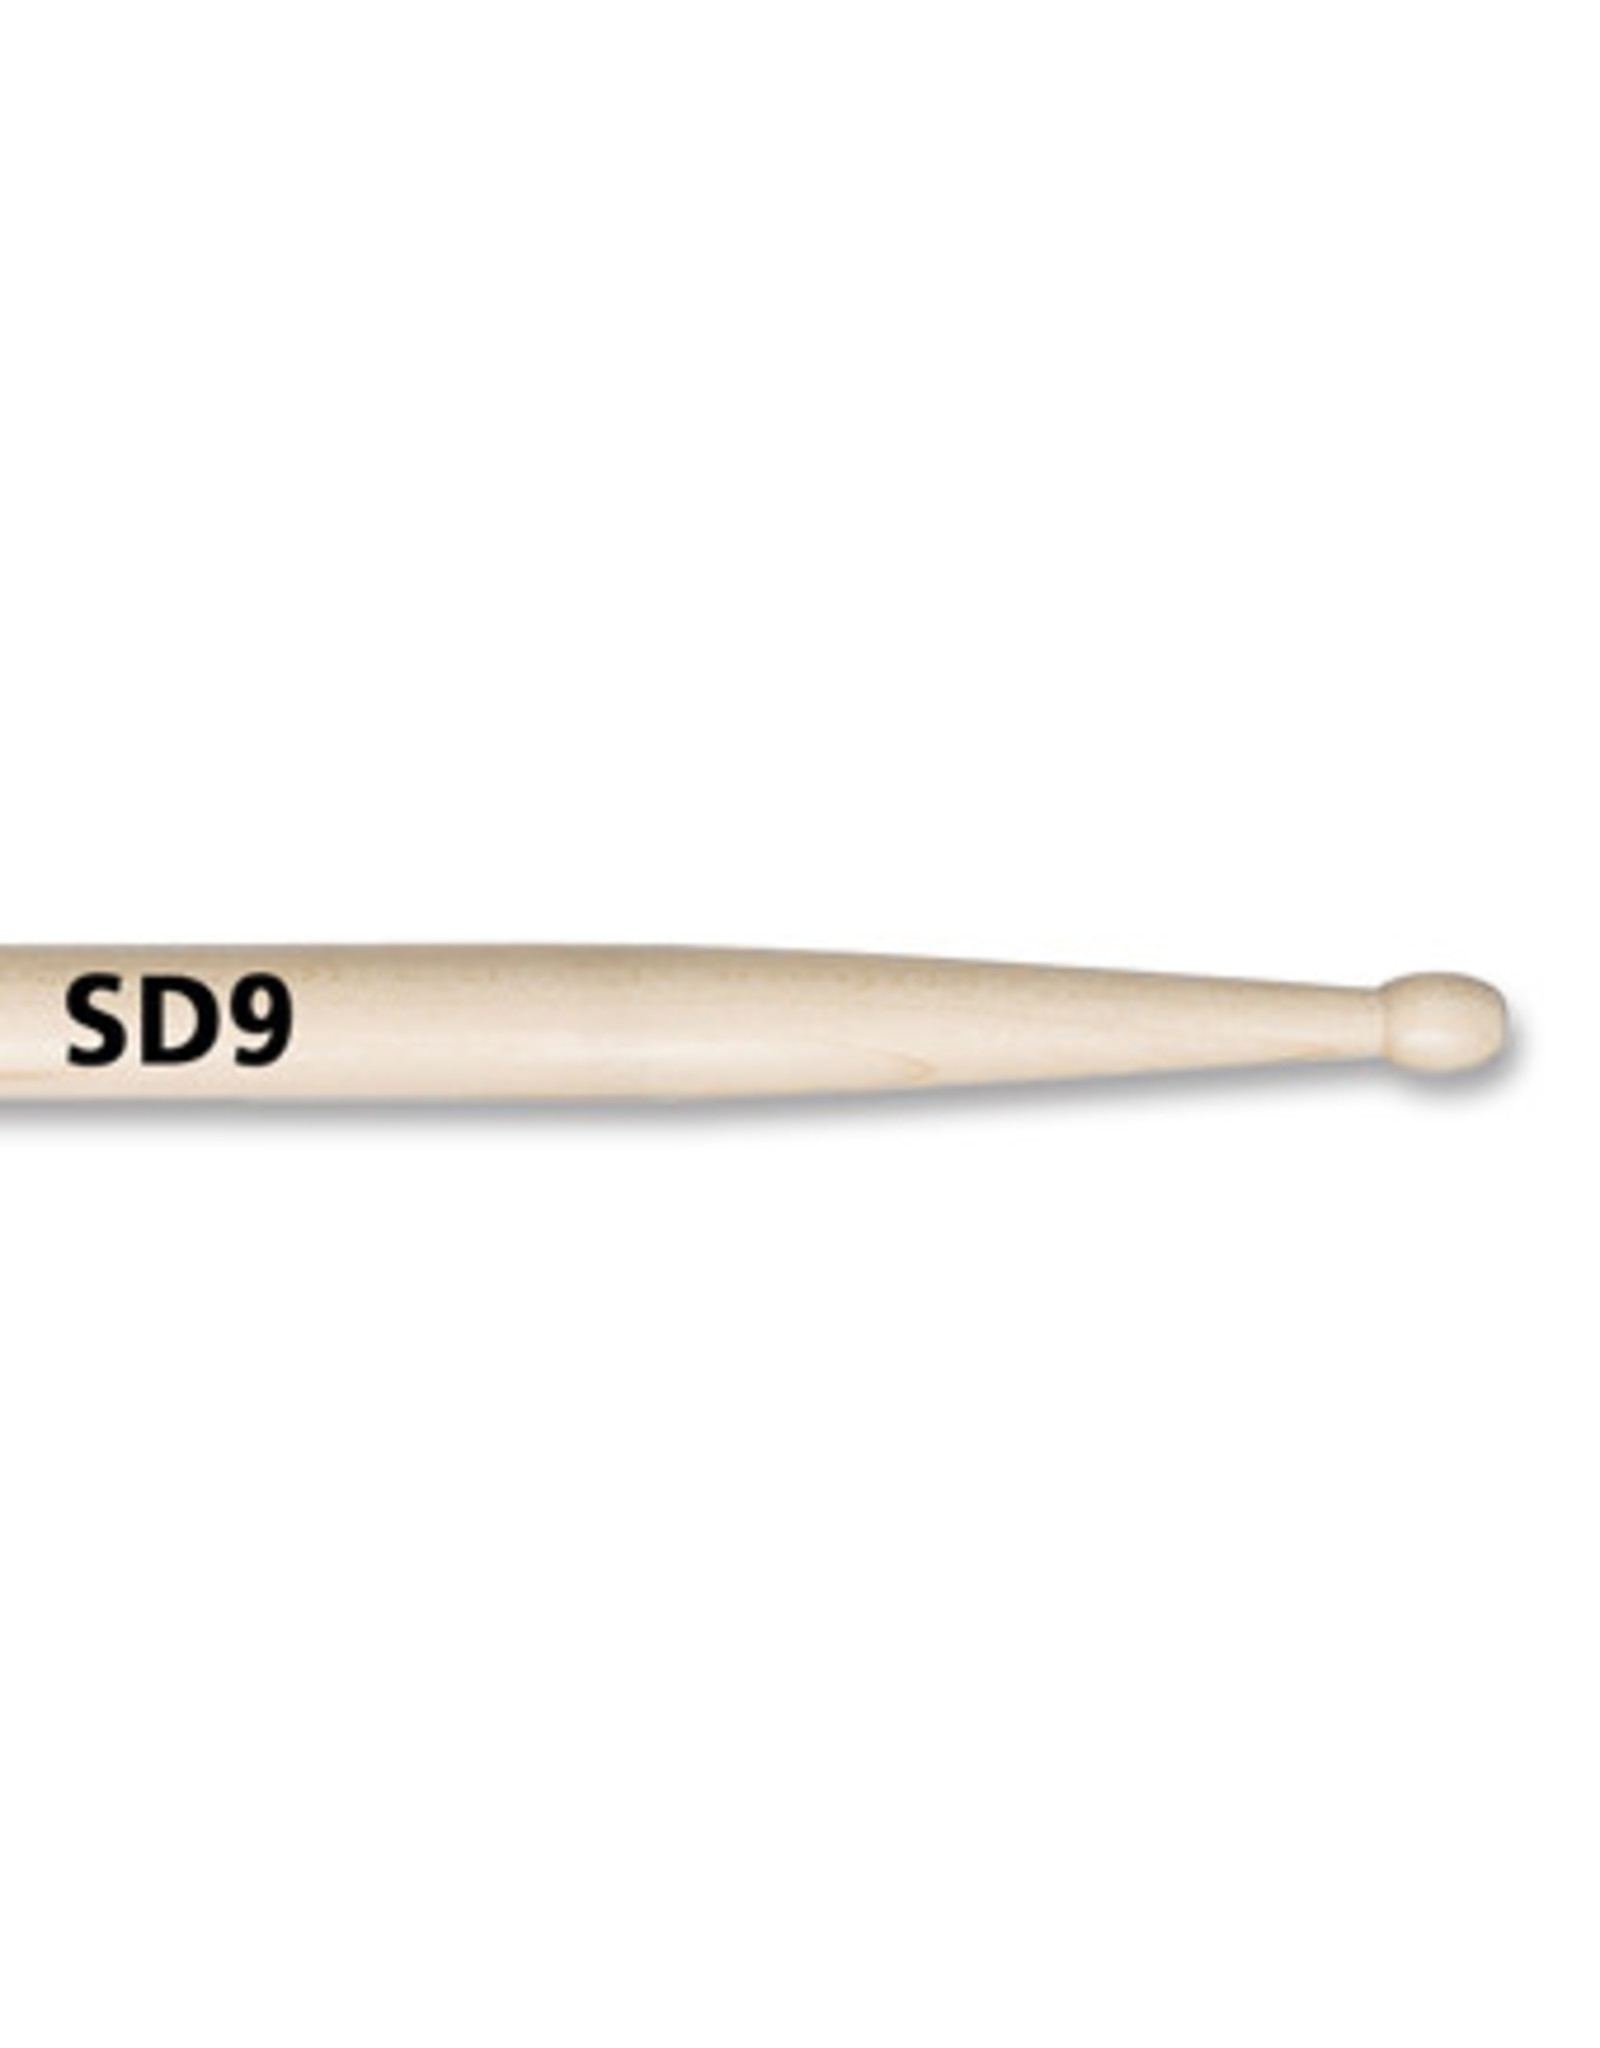 Vic Firth SD9 drives the drumstick